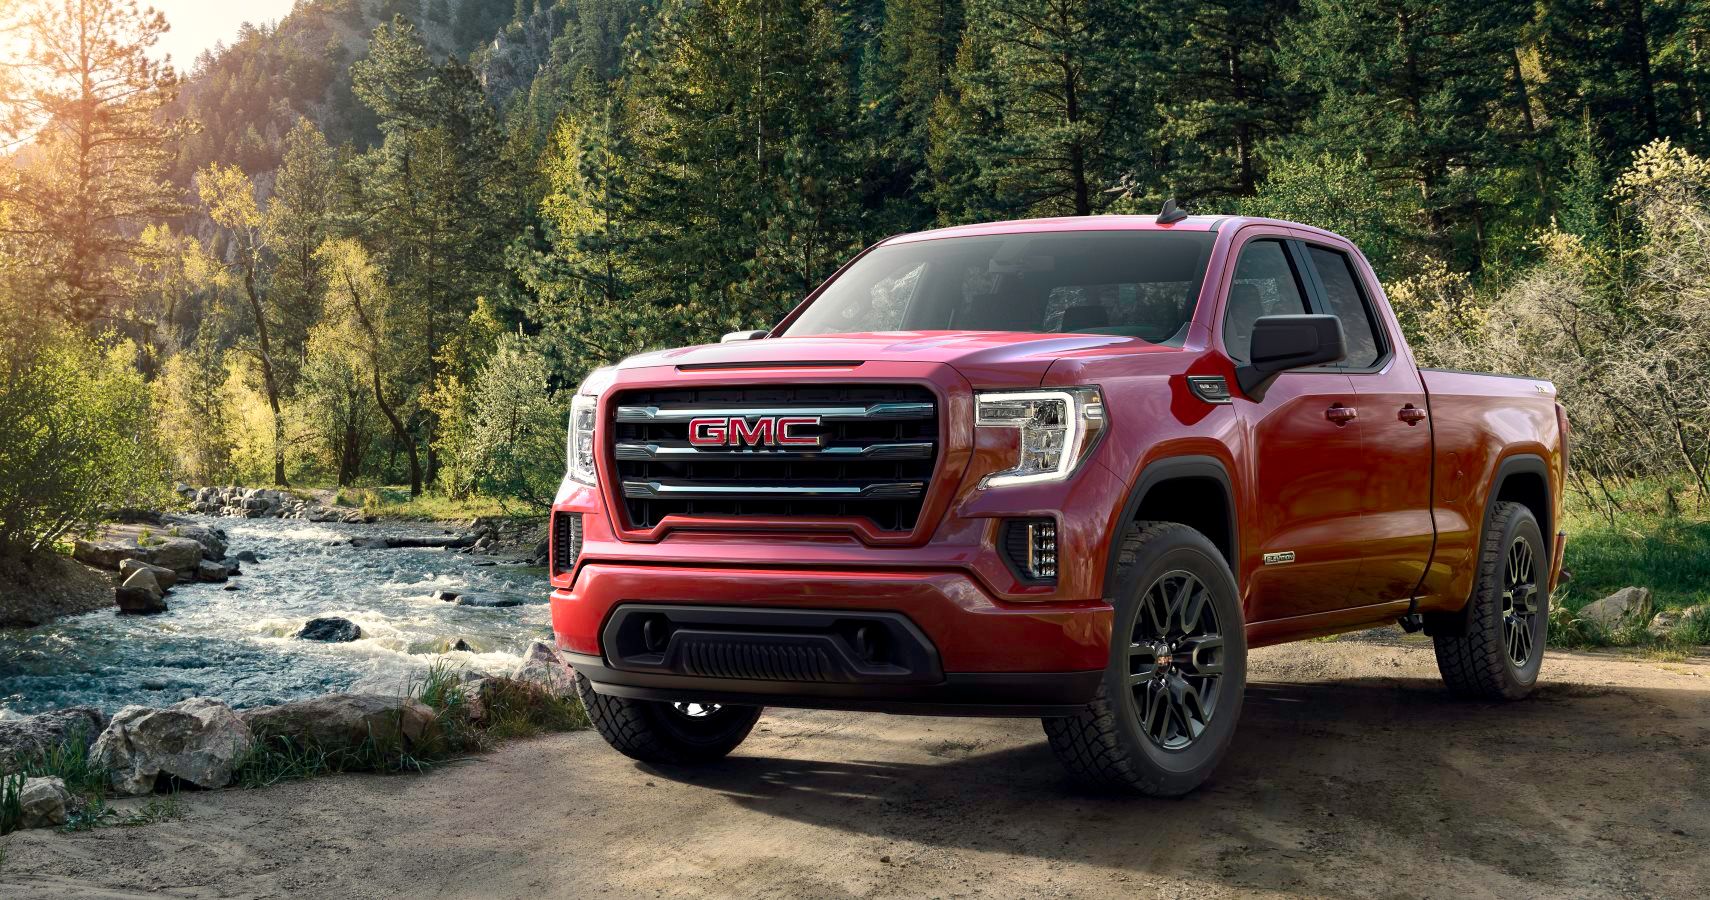 Next Generation 2019 GMC Sierra Elevation makes a statement in design, capability and advanced connectivity.